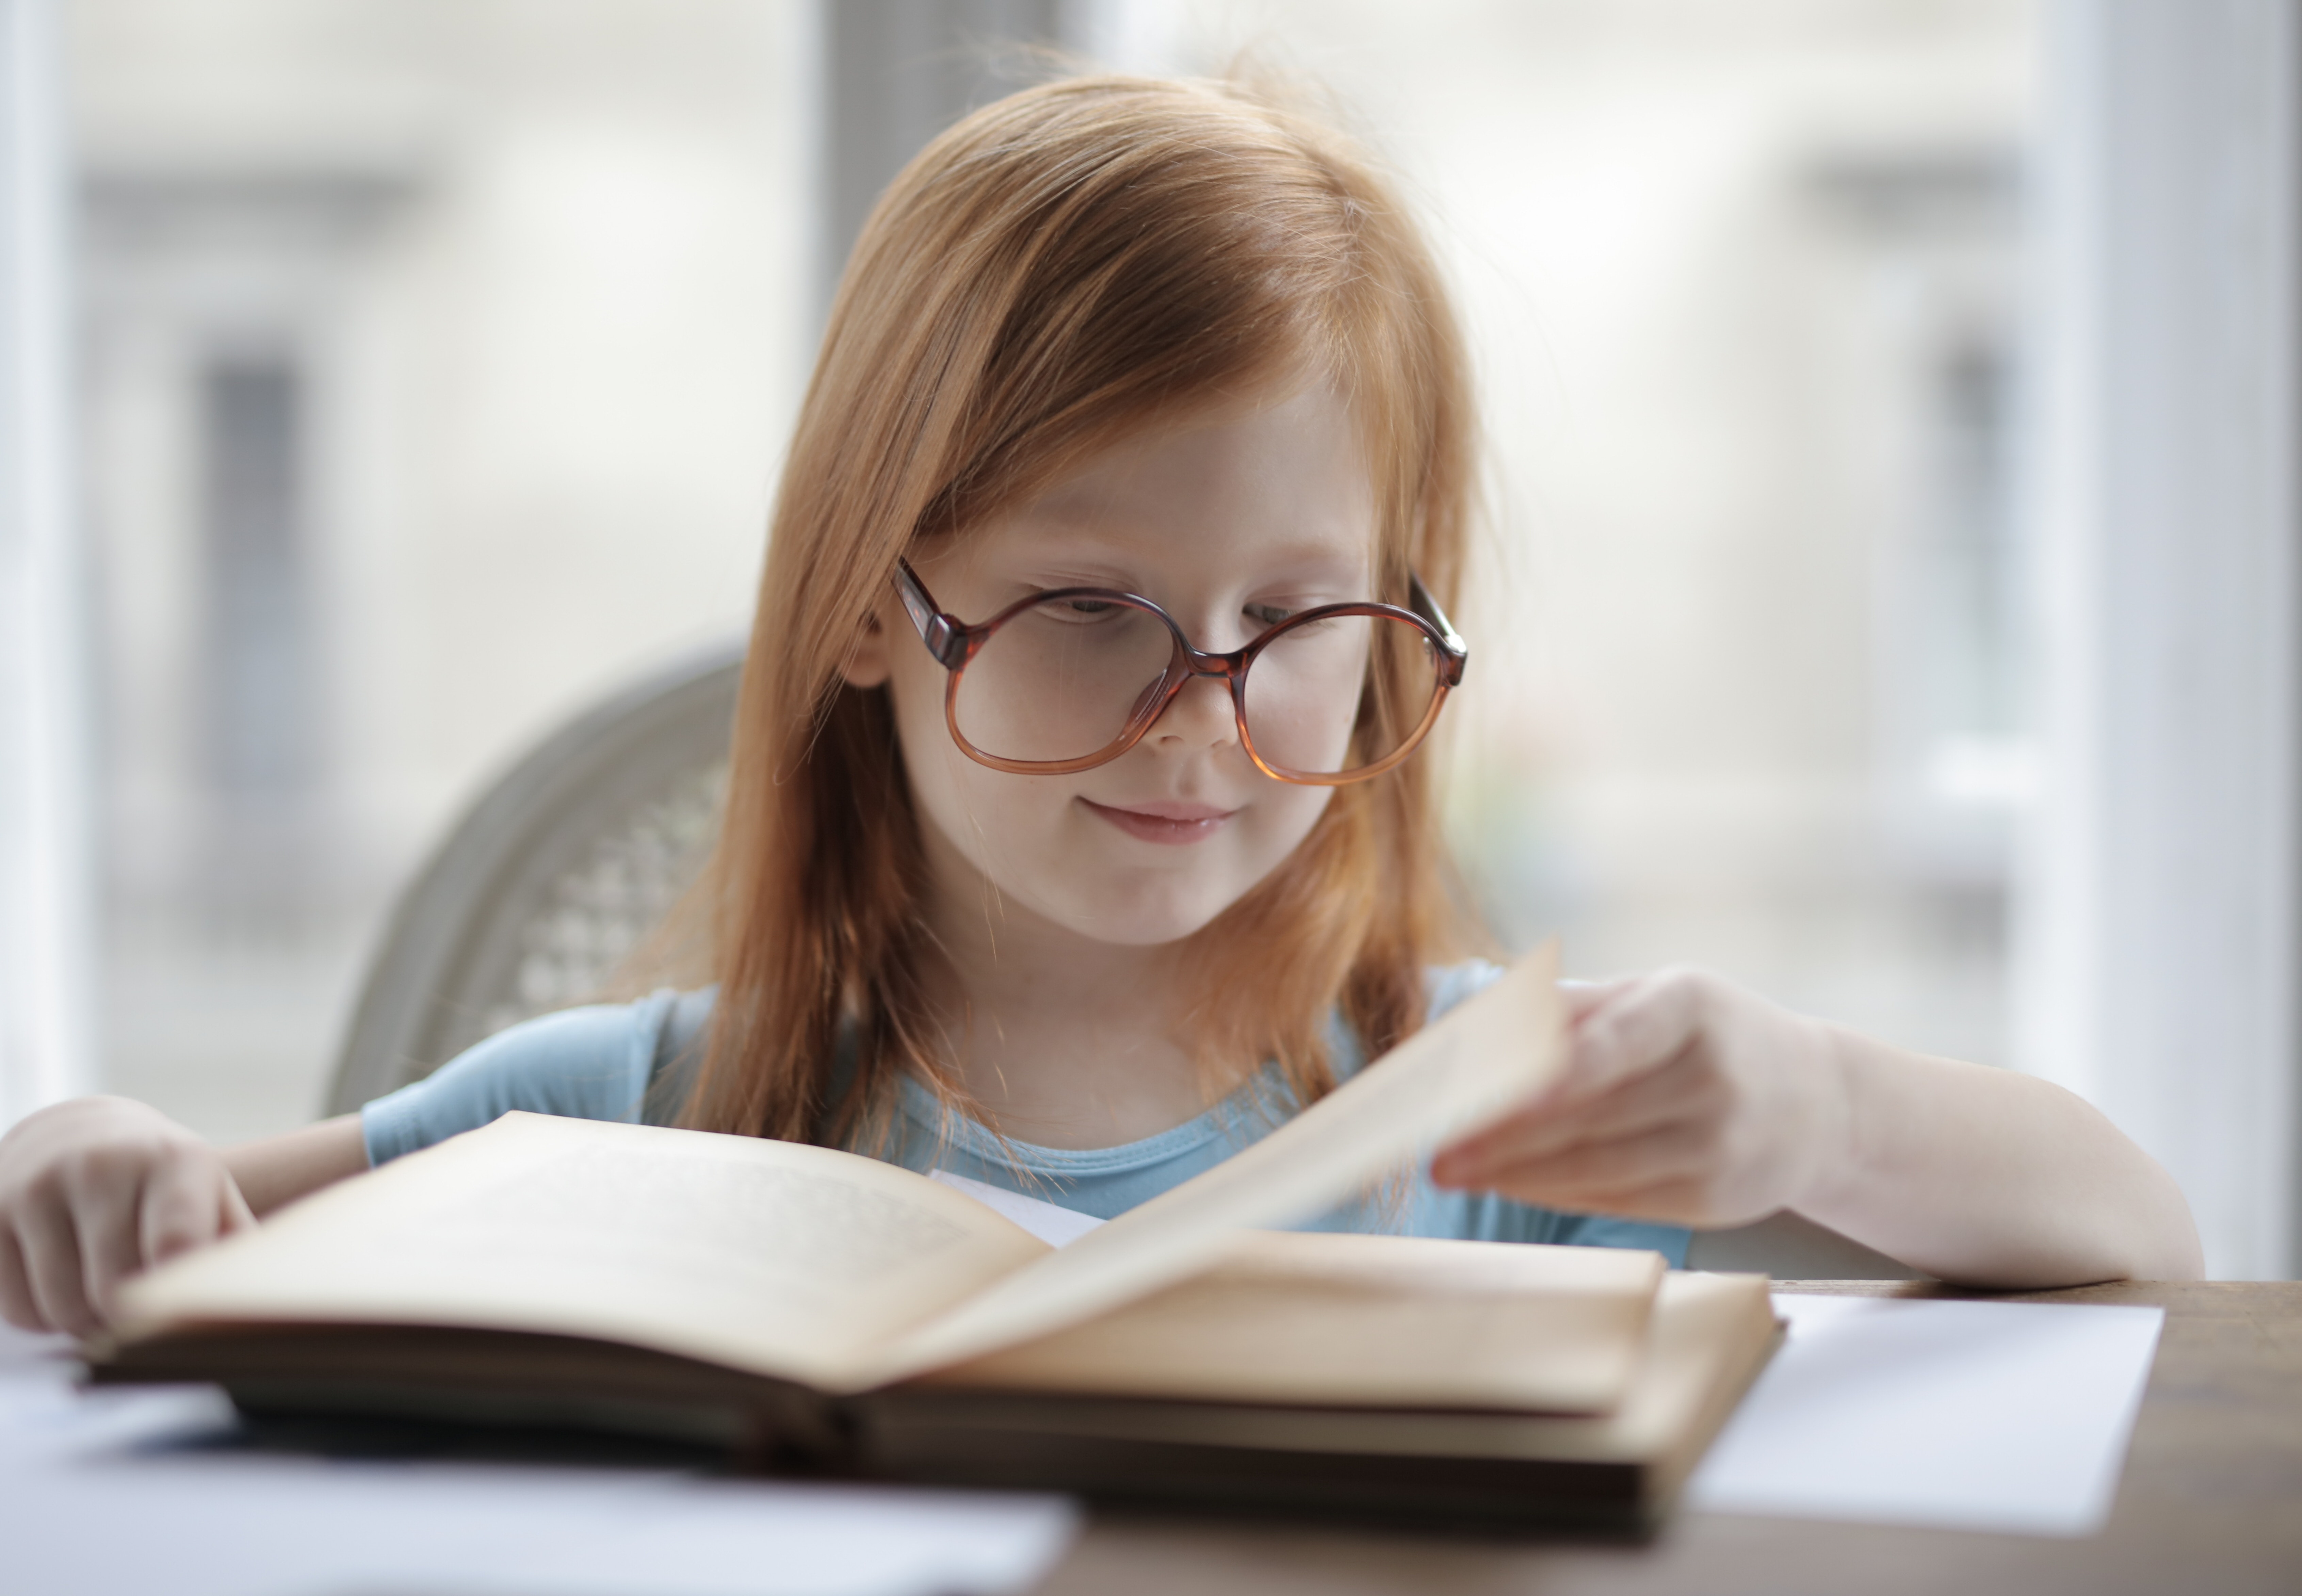 girl-reading-a-book-with-eyeglasses-3887454.jpg